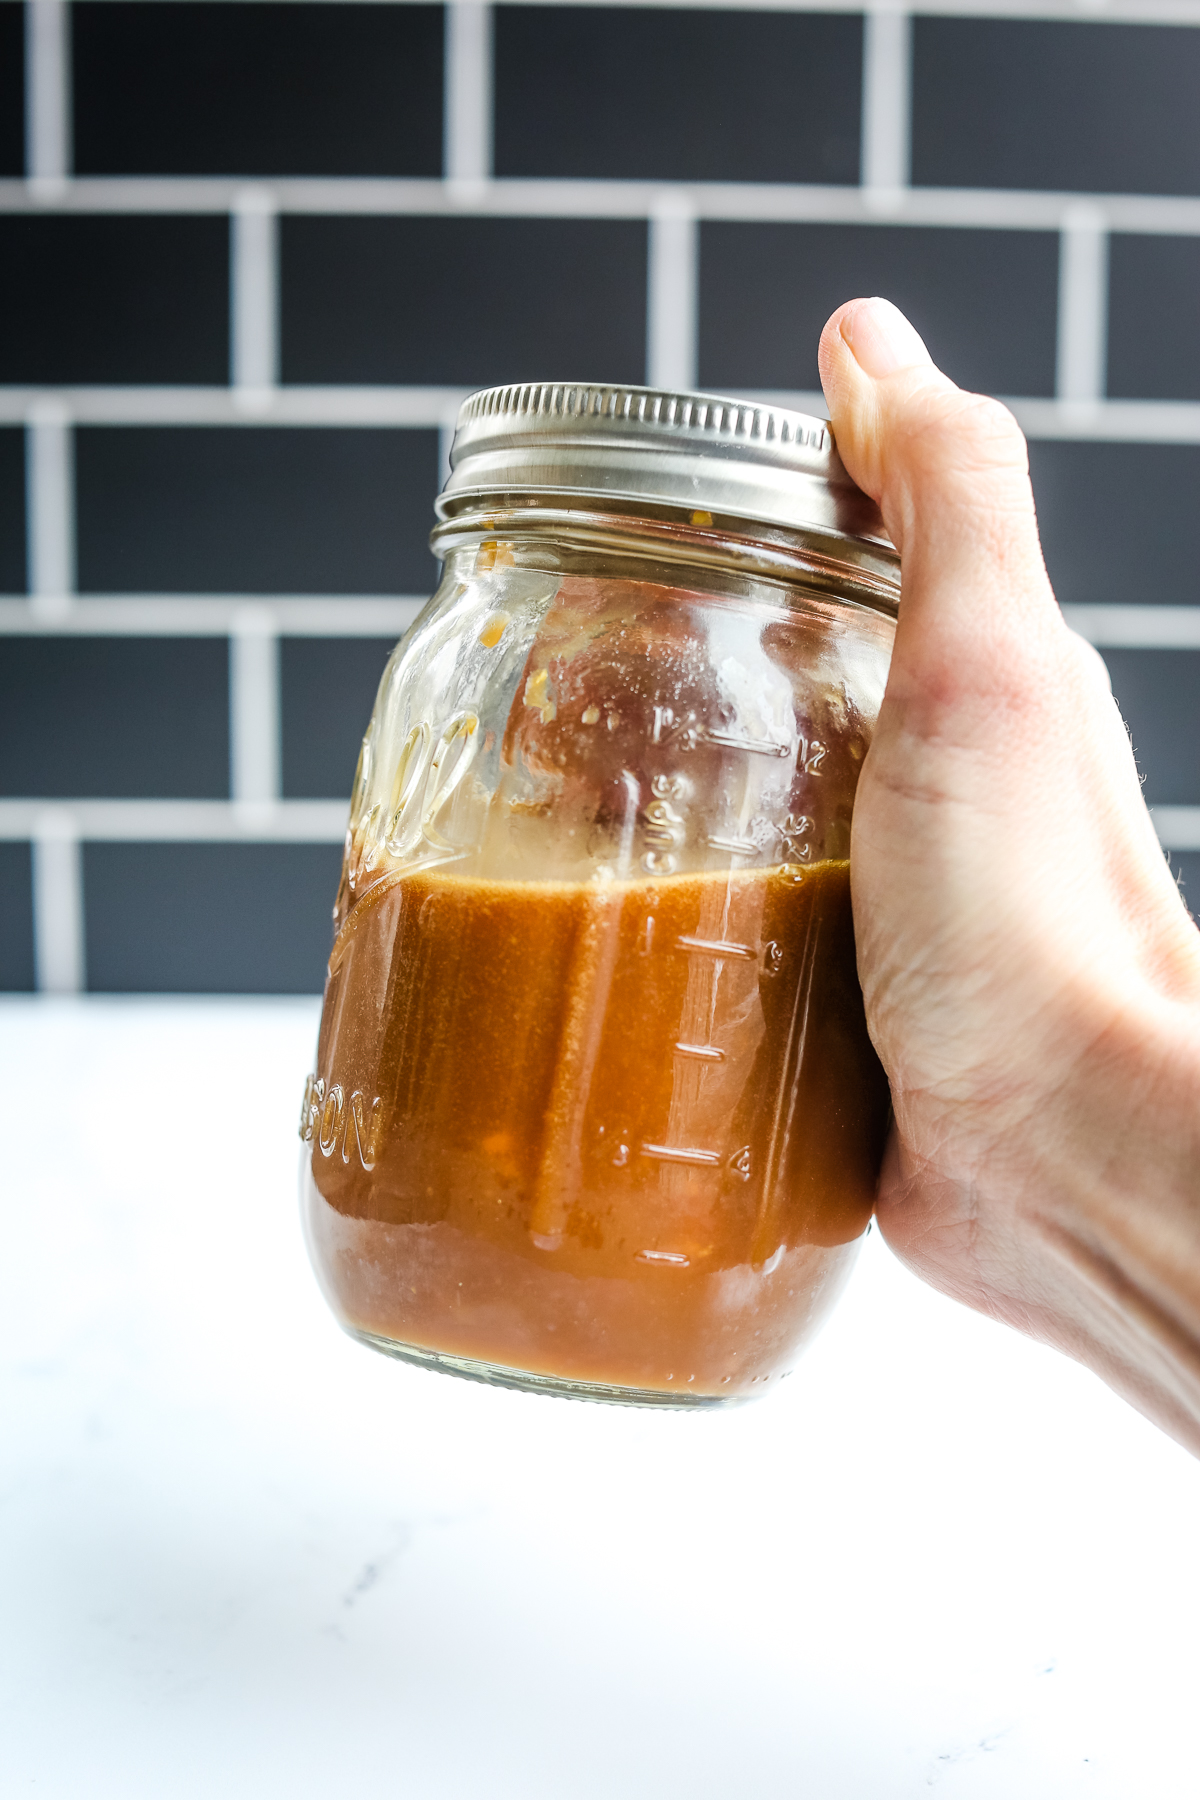 shaking a jar with healthy stir fry sauce